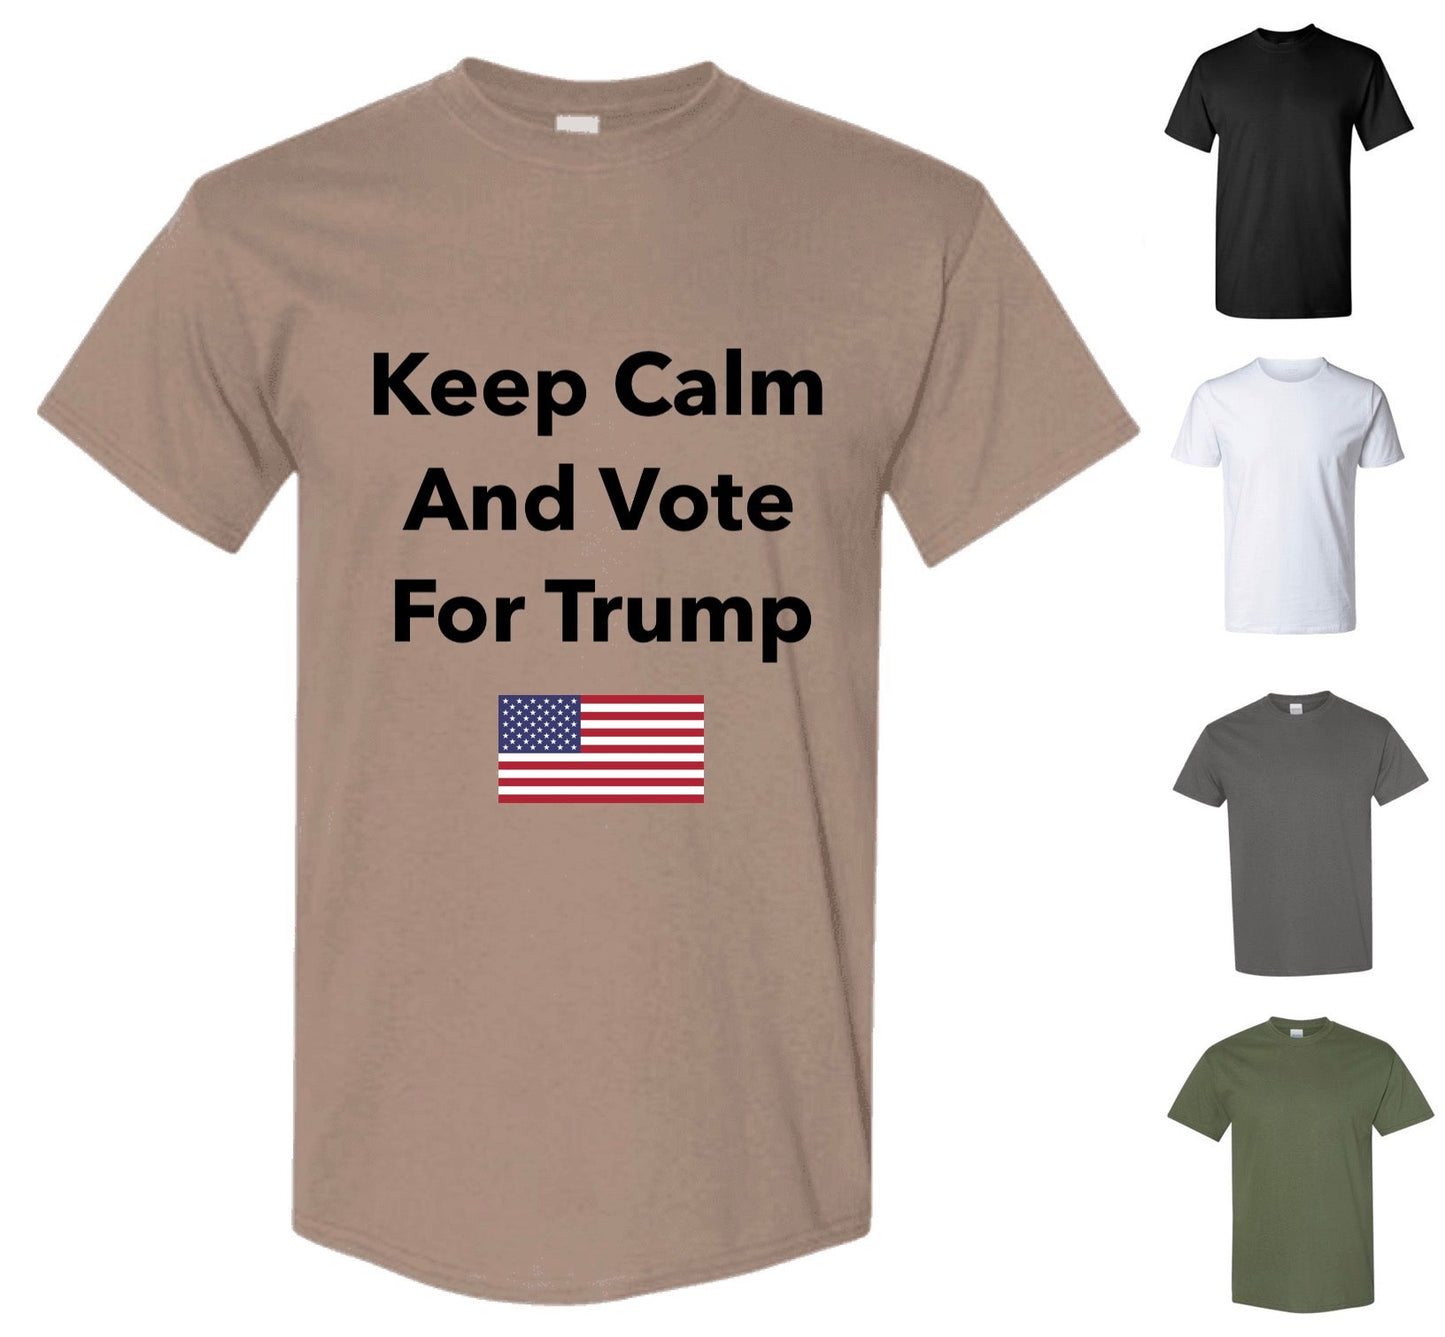 Keep Calm And Vote For Trump T-Shirt — Free Shipping